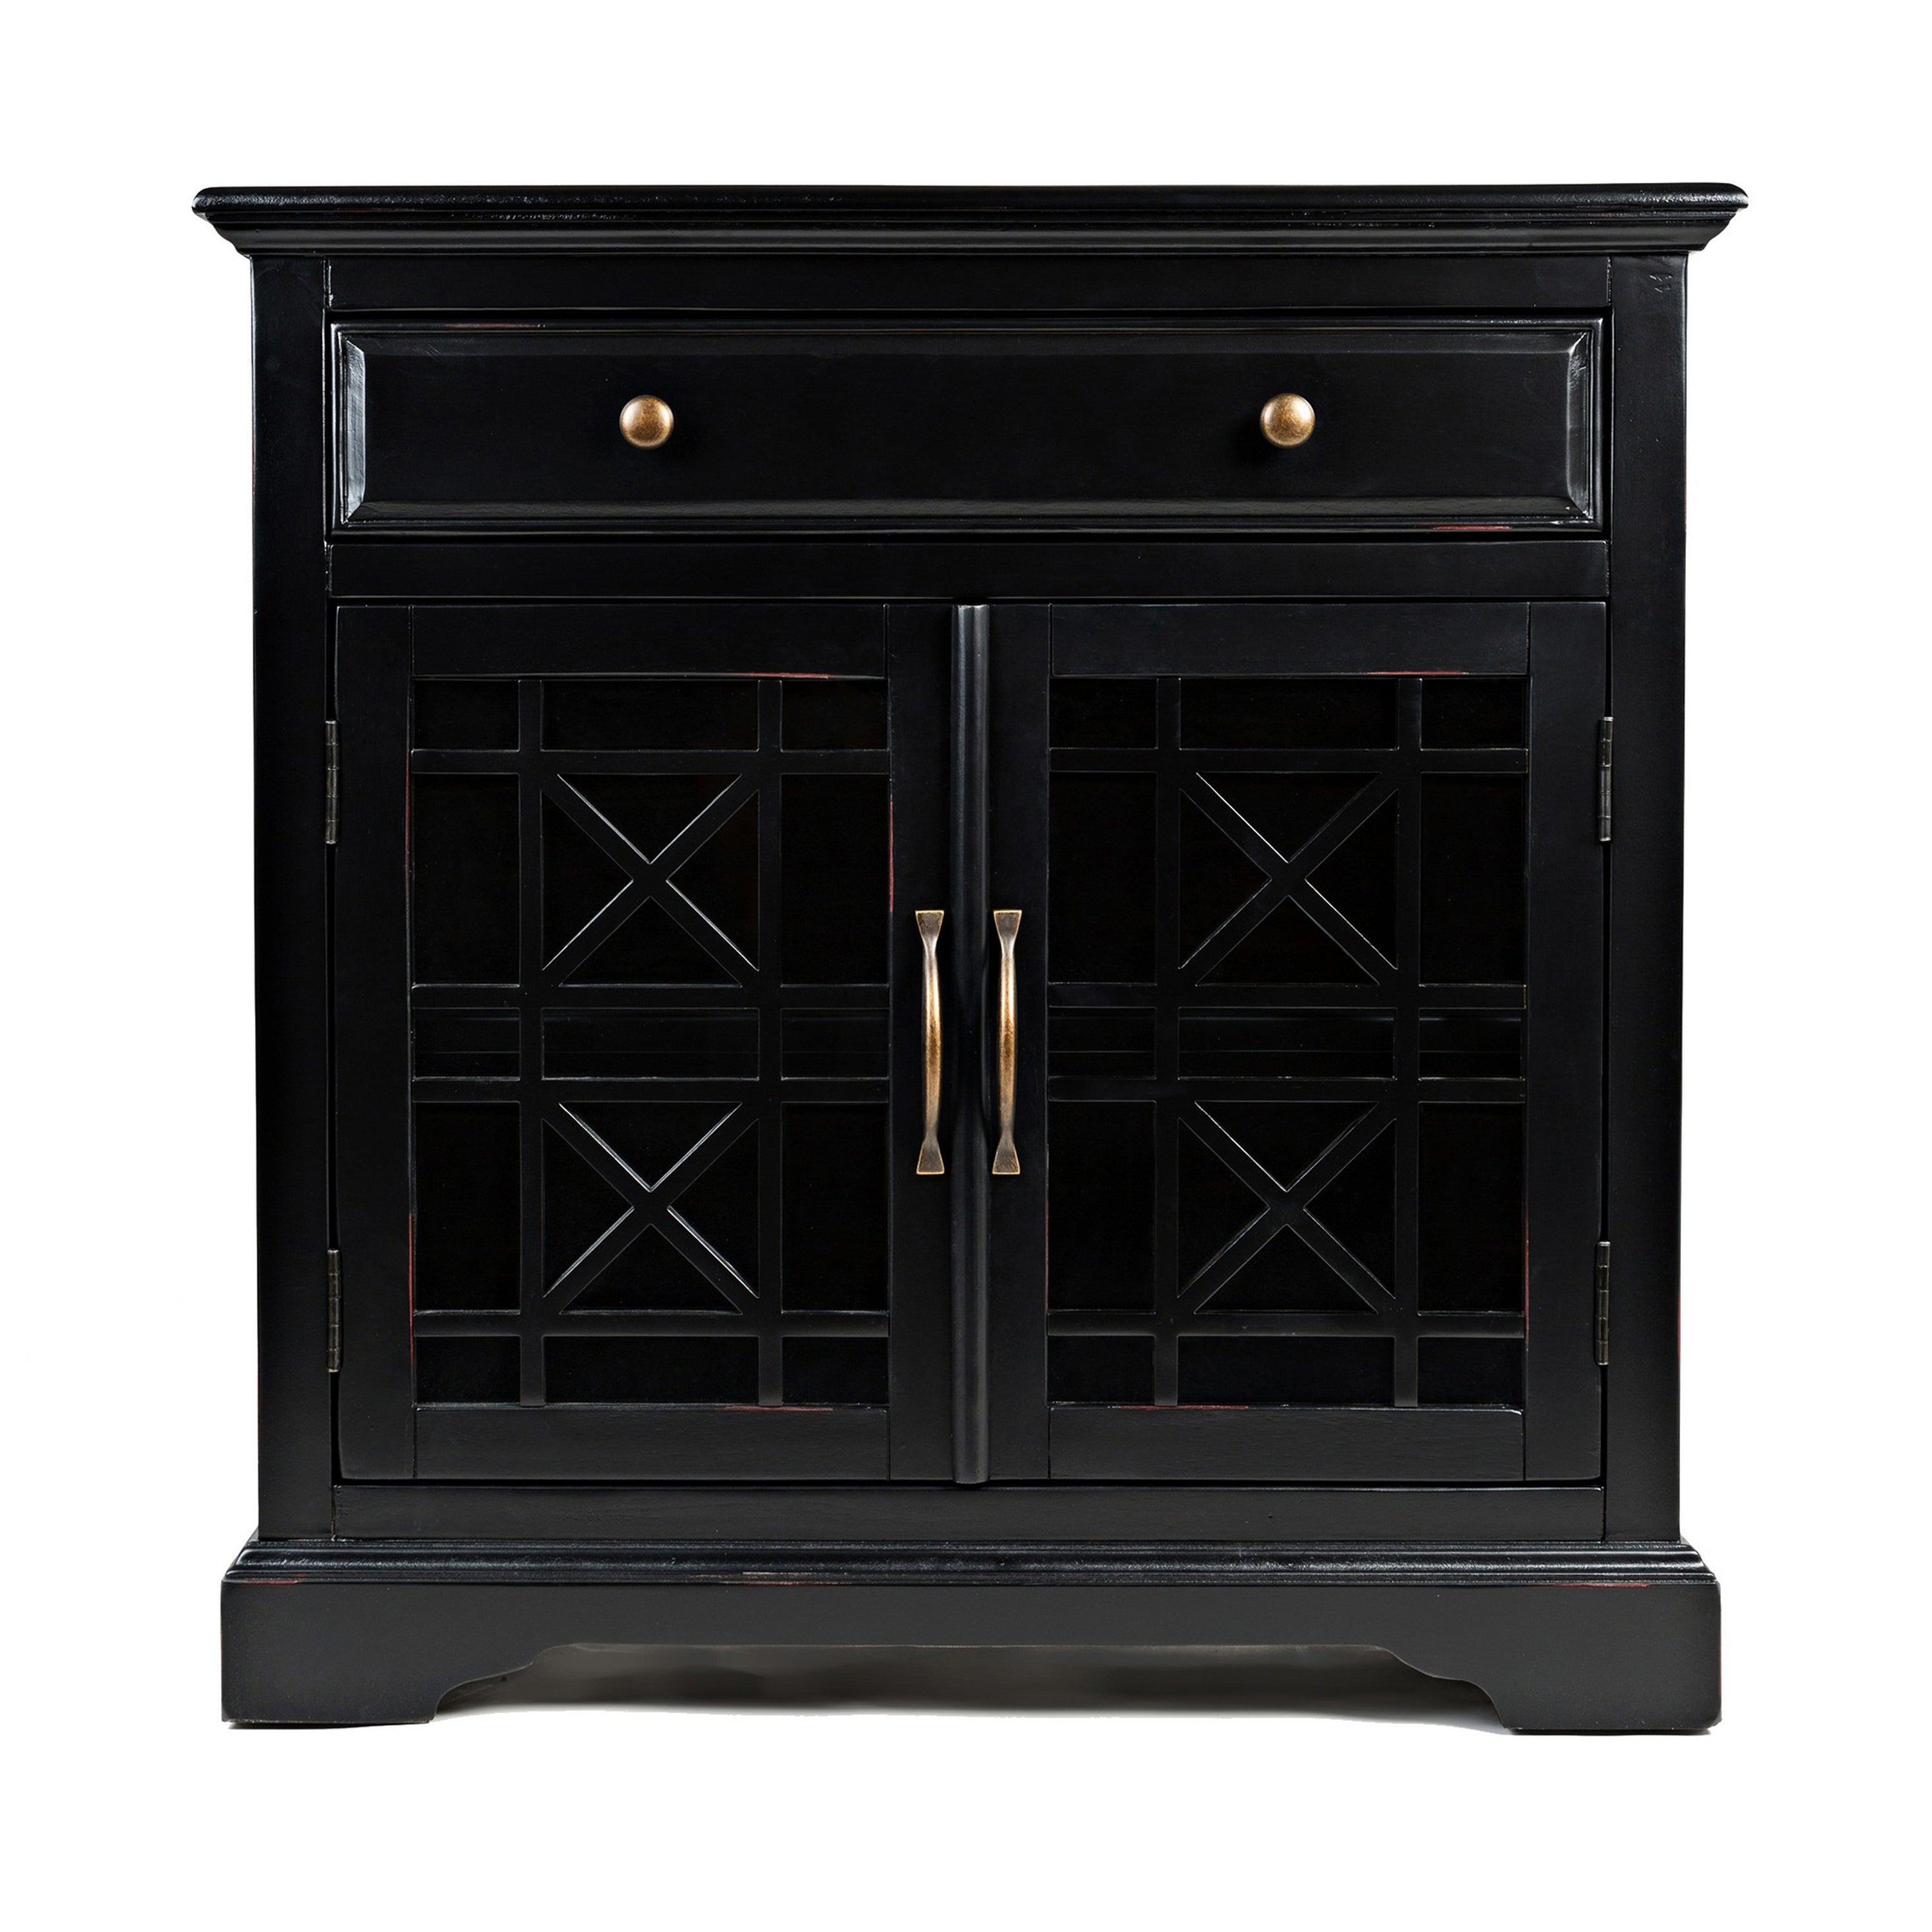 Craftsman Series 32" Wooden Accent Cabinet with Fretwork Glass Front, Black